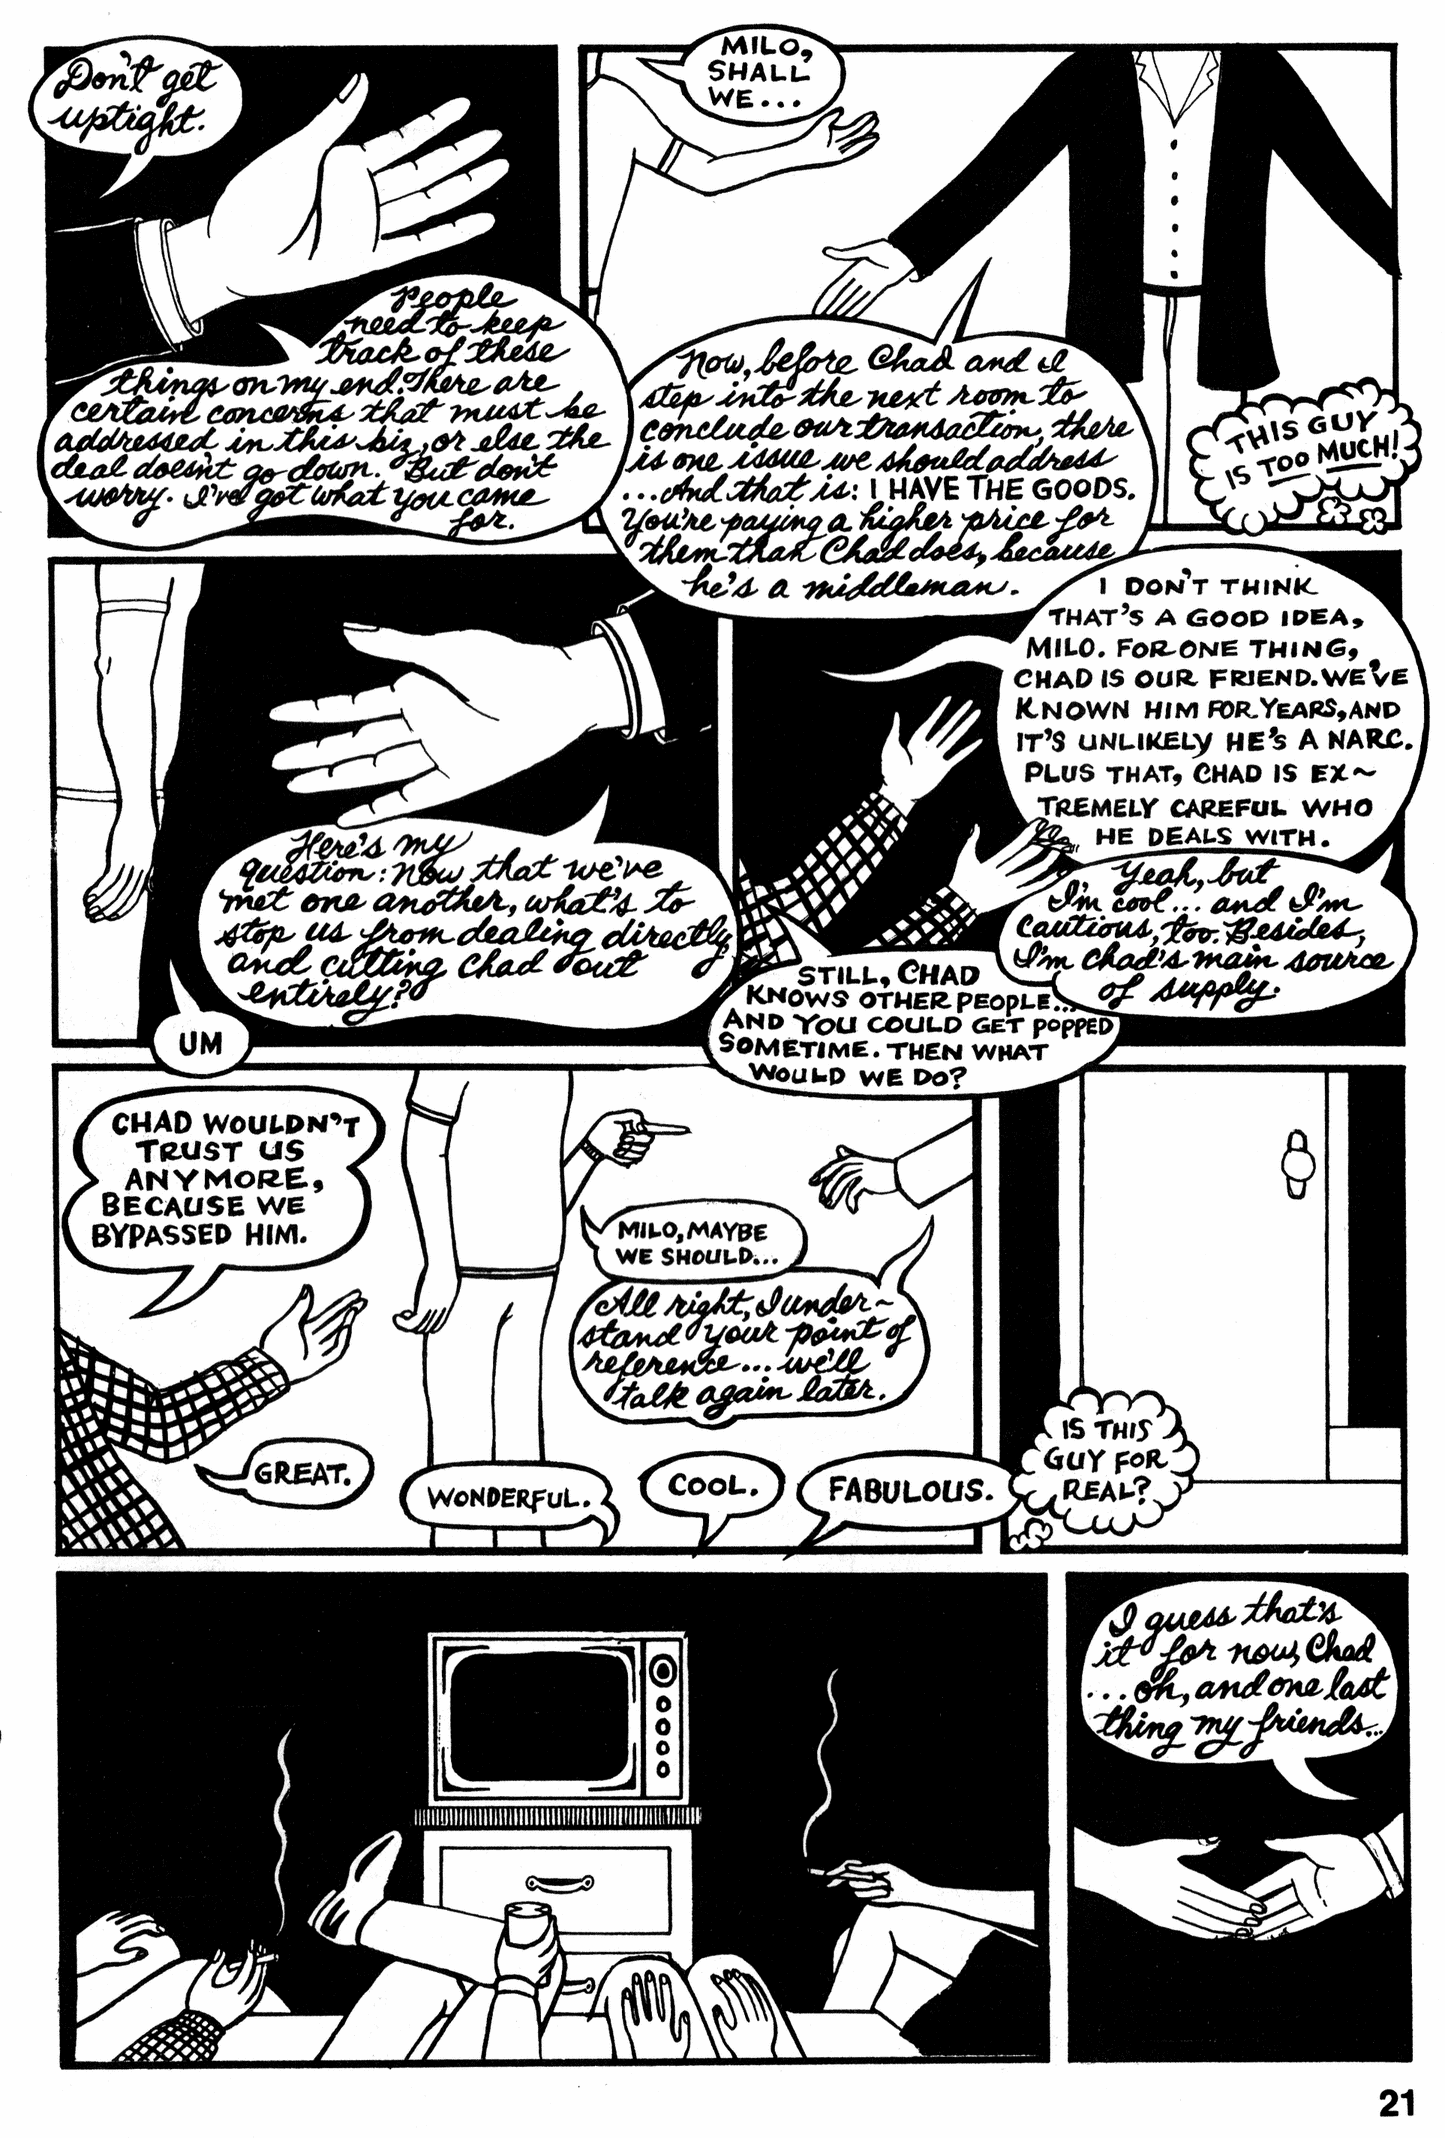 Read online Real Stuff comic -  Issue #8 - 22